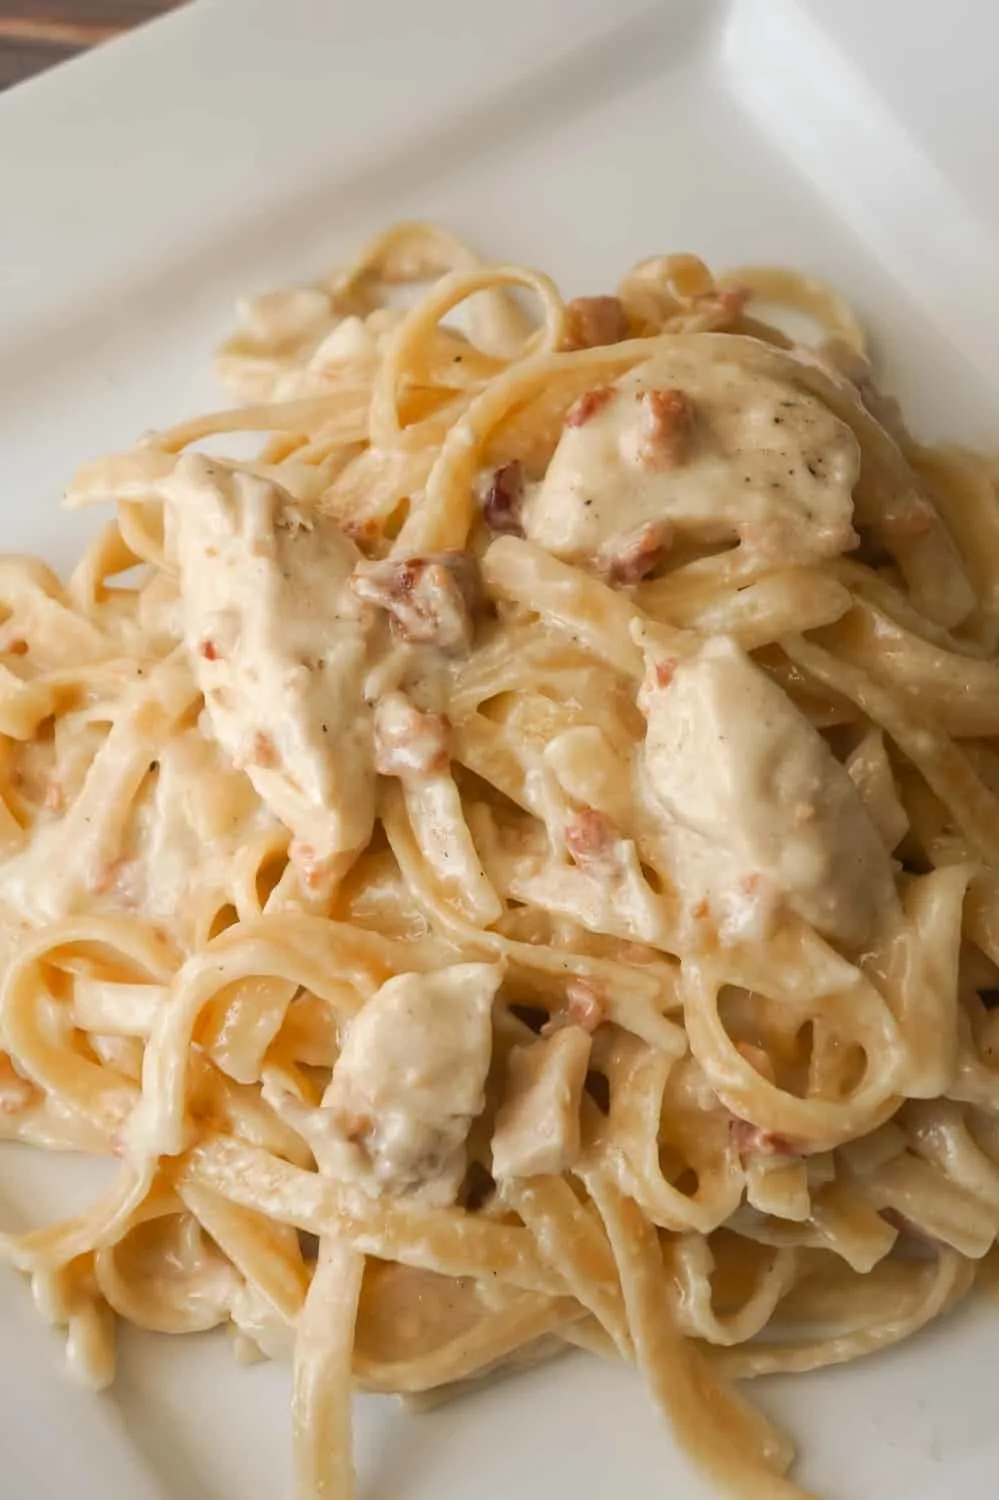 Instant Pot Bacon & Chicken Fettuccine Alfredo is an easy dinner recipe using an Instant Pot. This delicious pasta is coated in a creamy garlic Alfredo sauce and loaded with chicken and bacon.